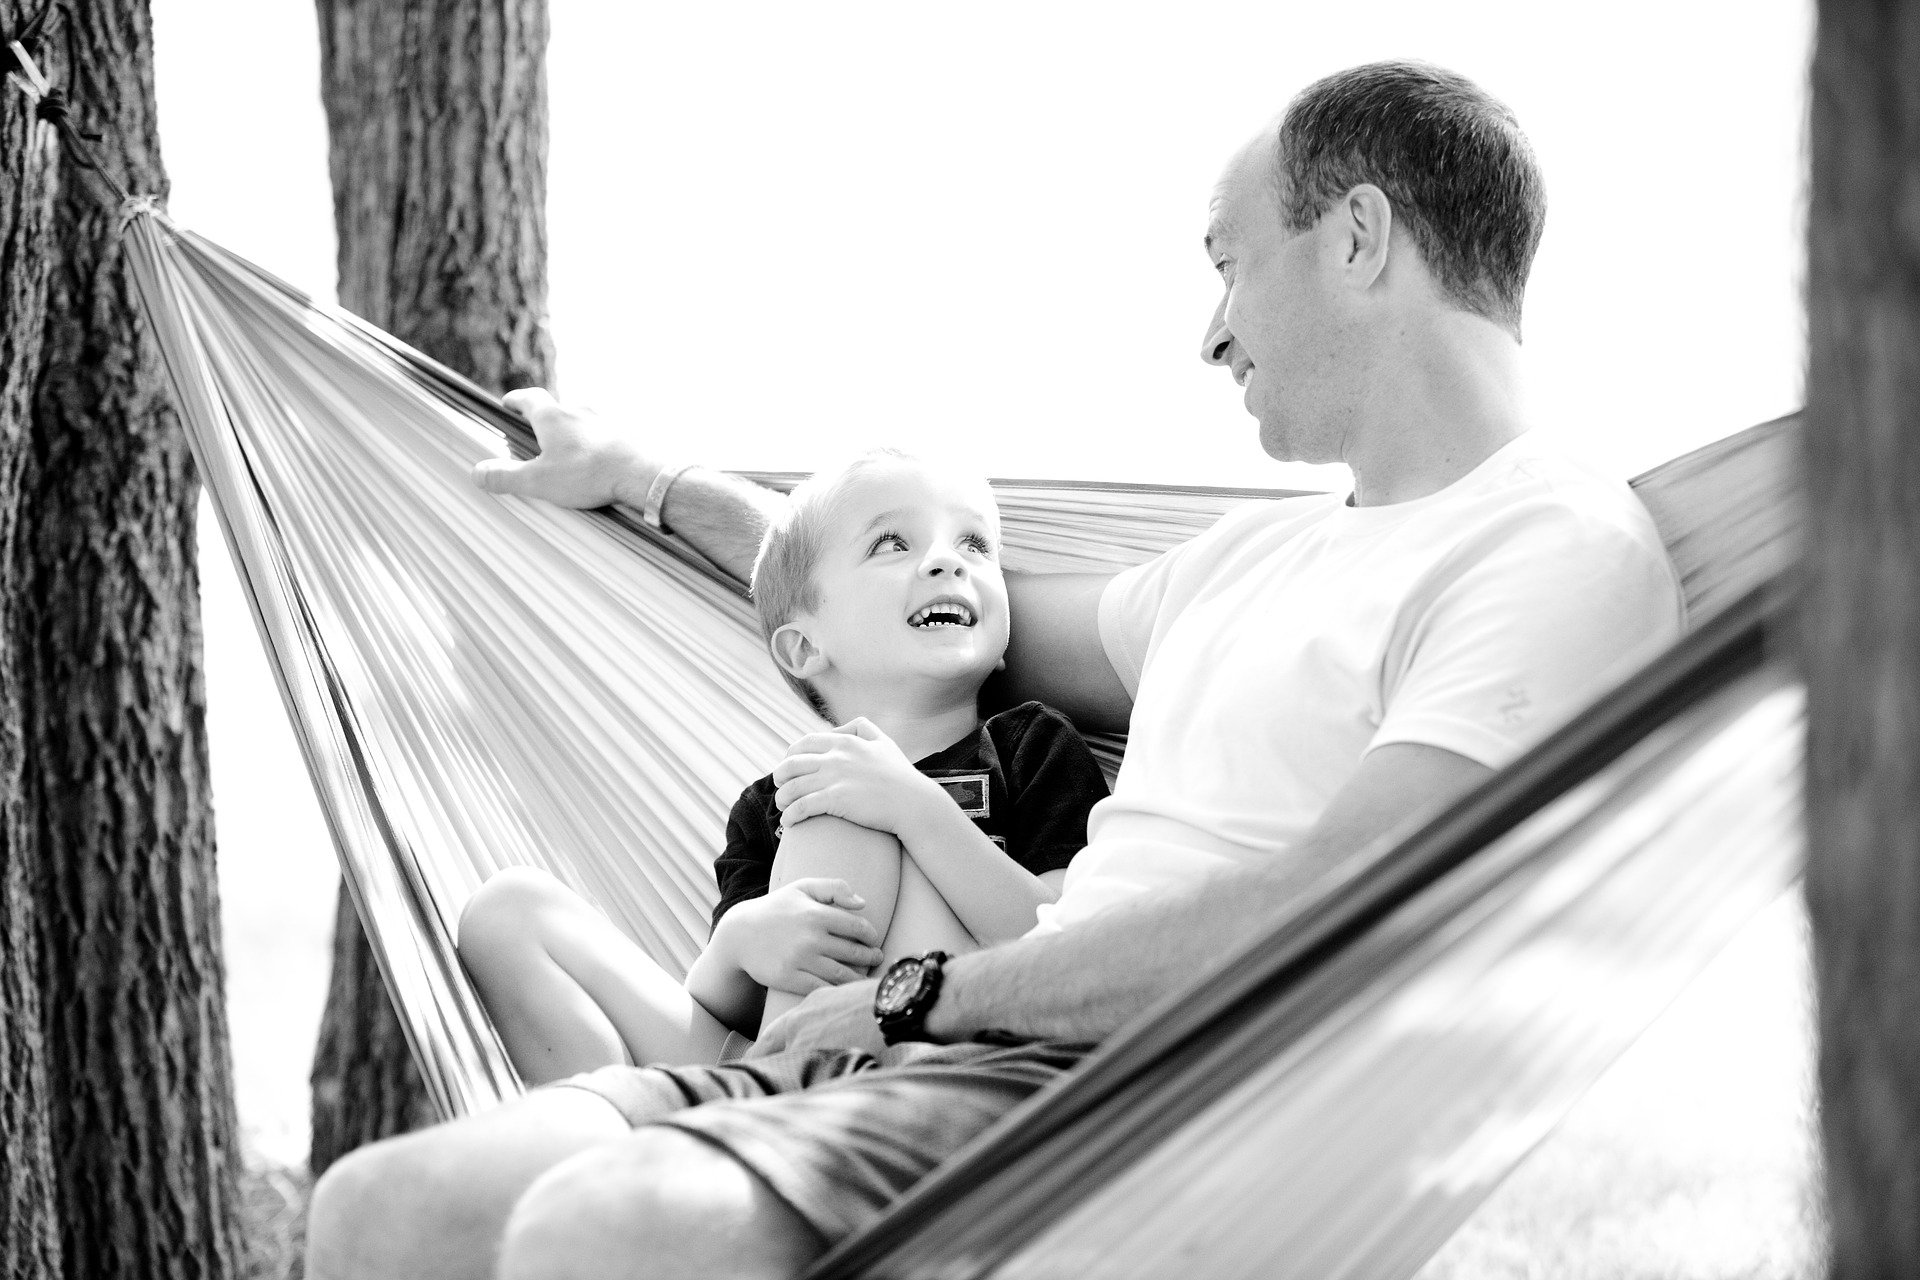 A father and his son sitting together in a hammock. | Source: Pixabay.